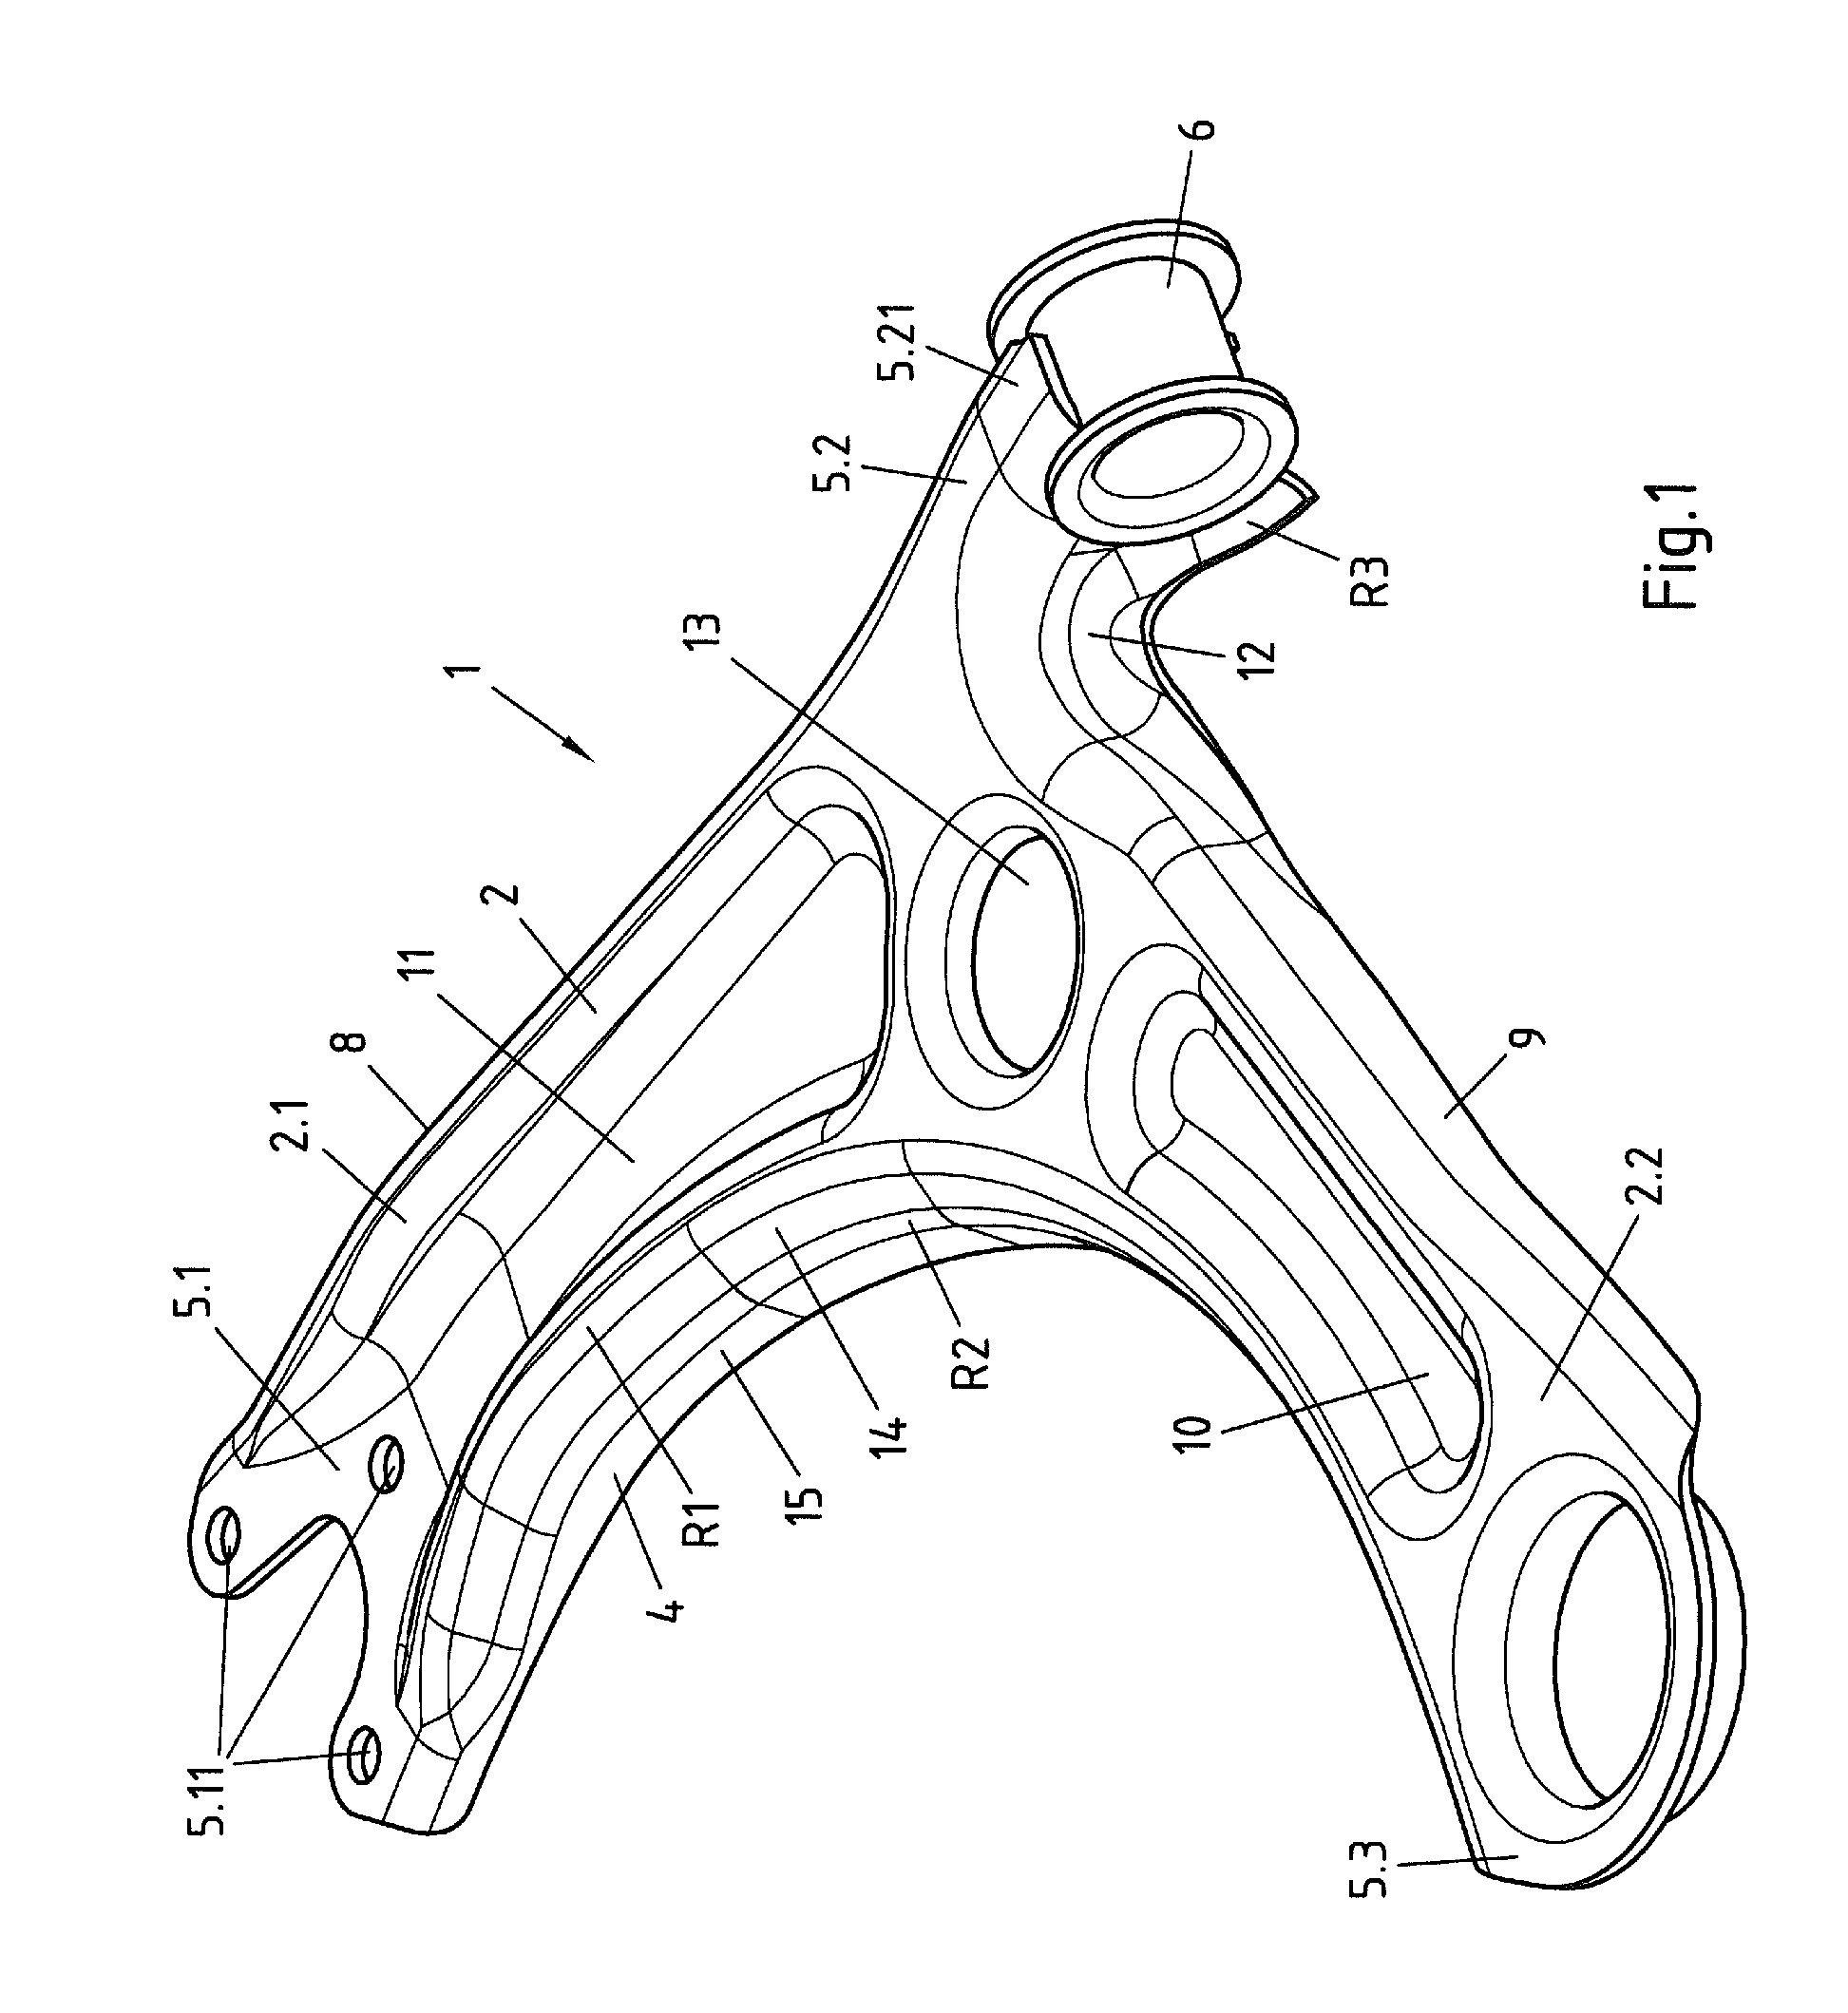 Method for Producing a Chassis Link